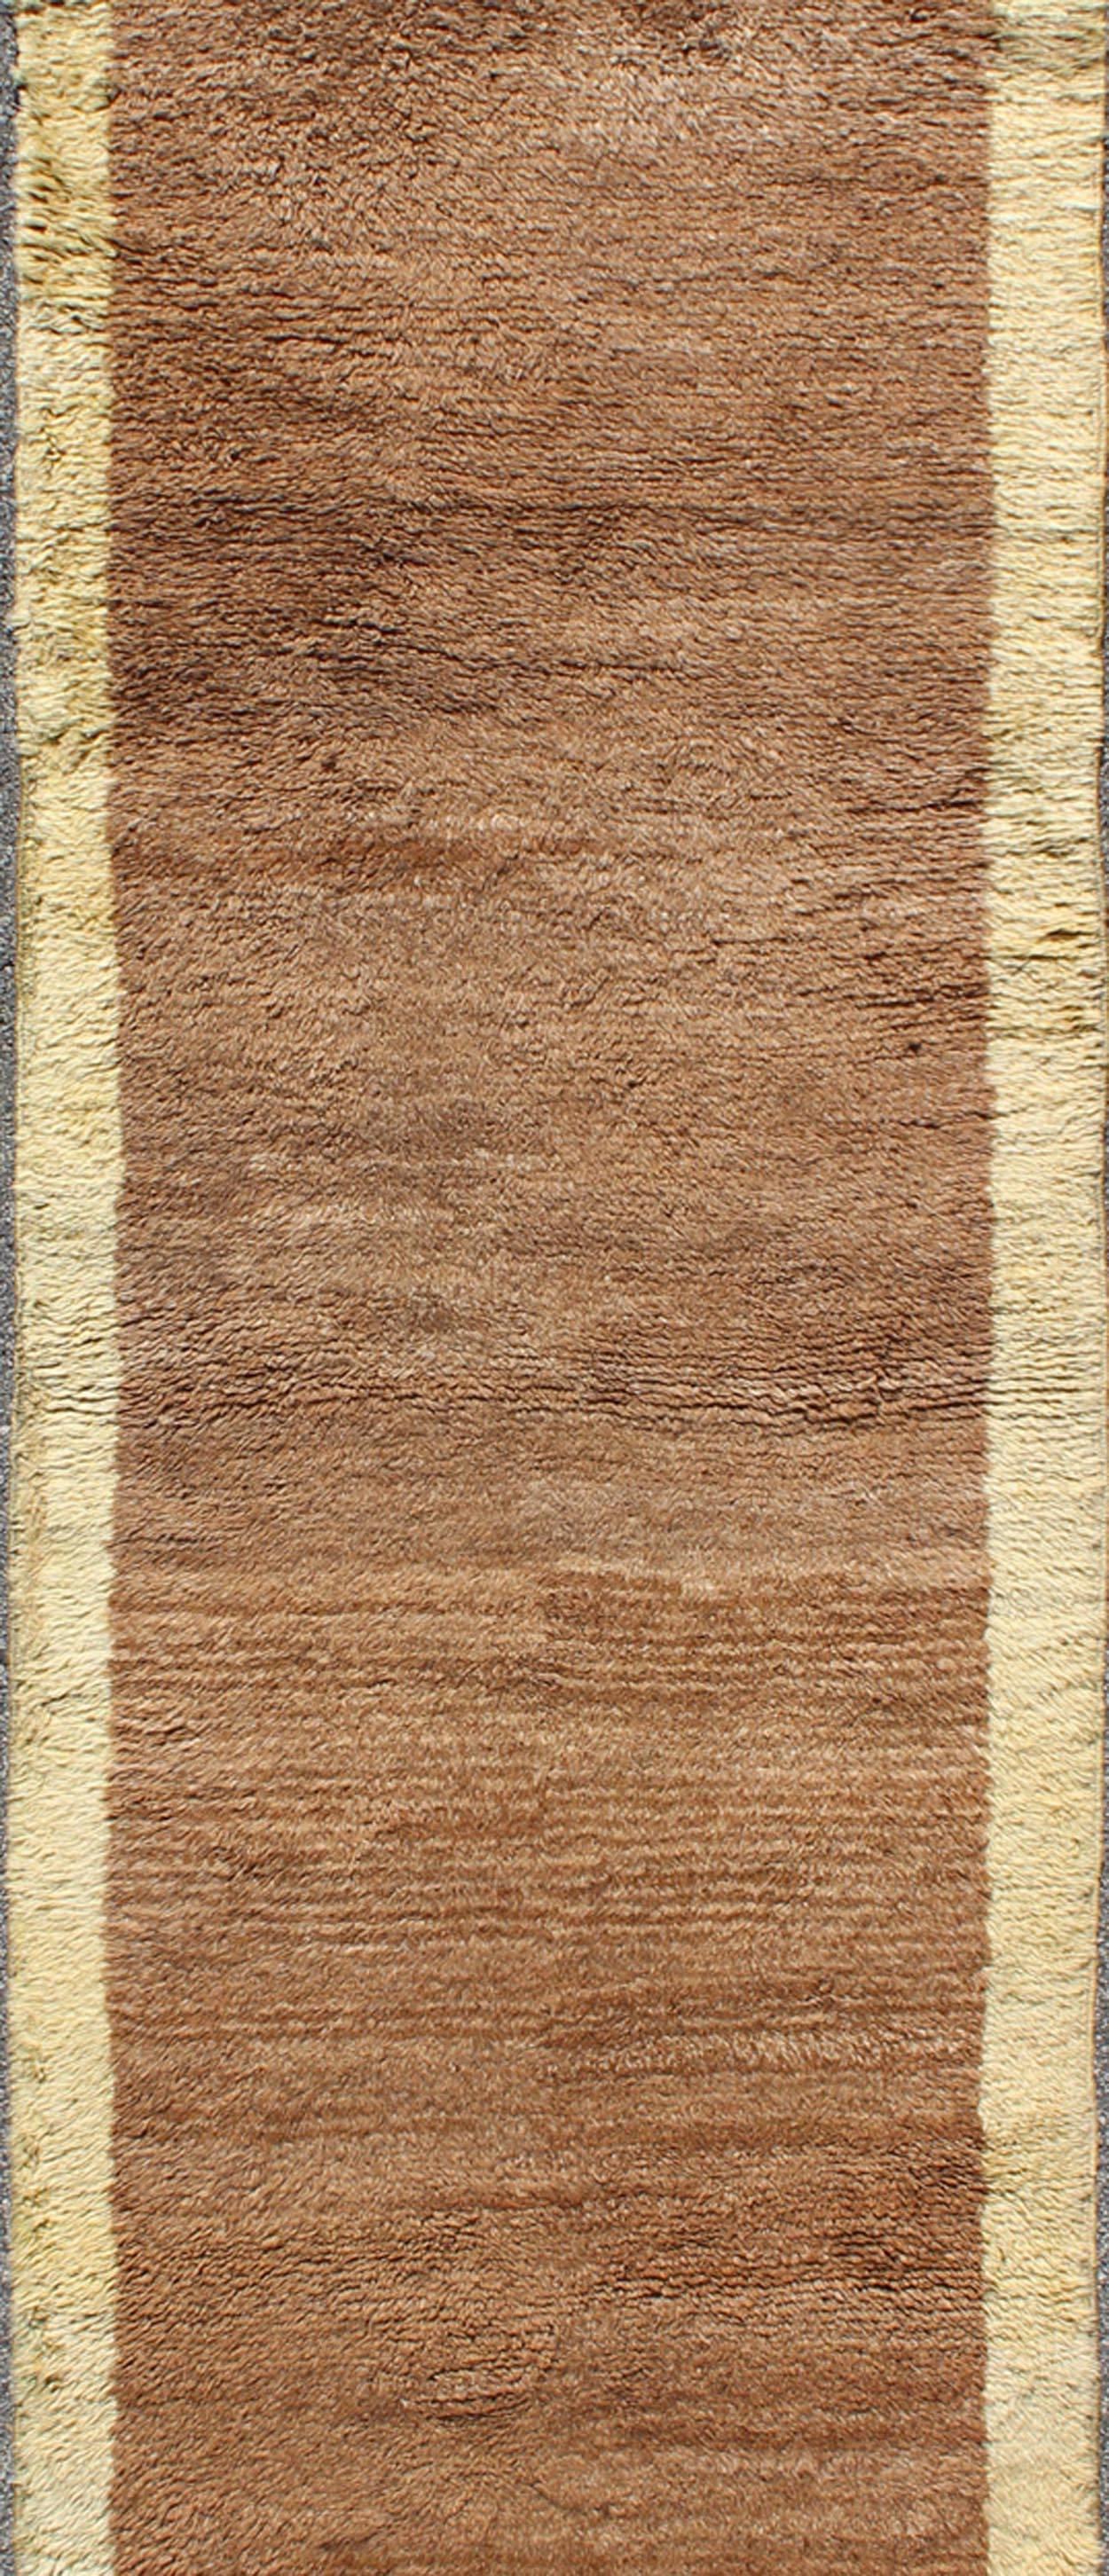 Hand-Knotted Mid-Century Modern Turkish Tulu Rug with Open Brown Field and Cream Border